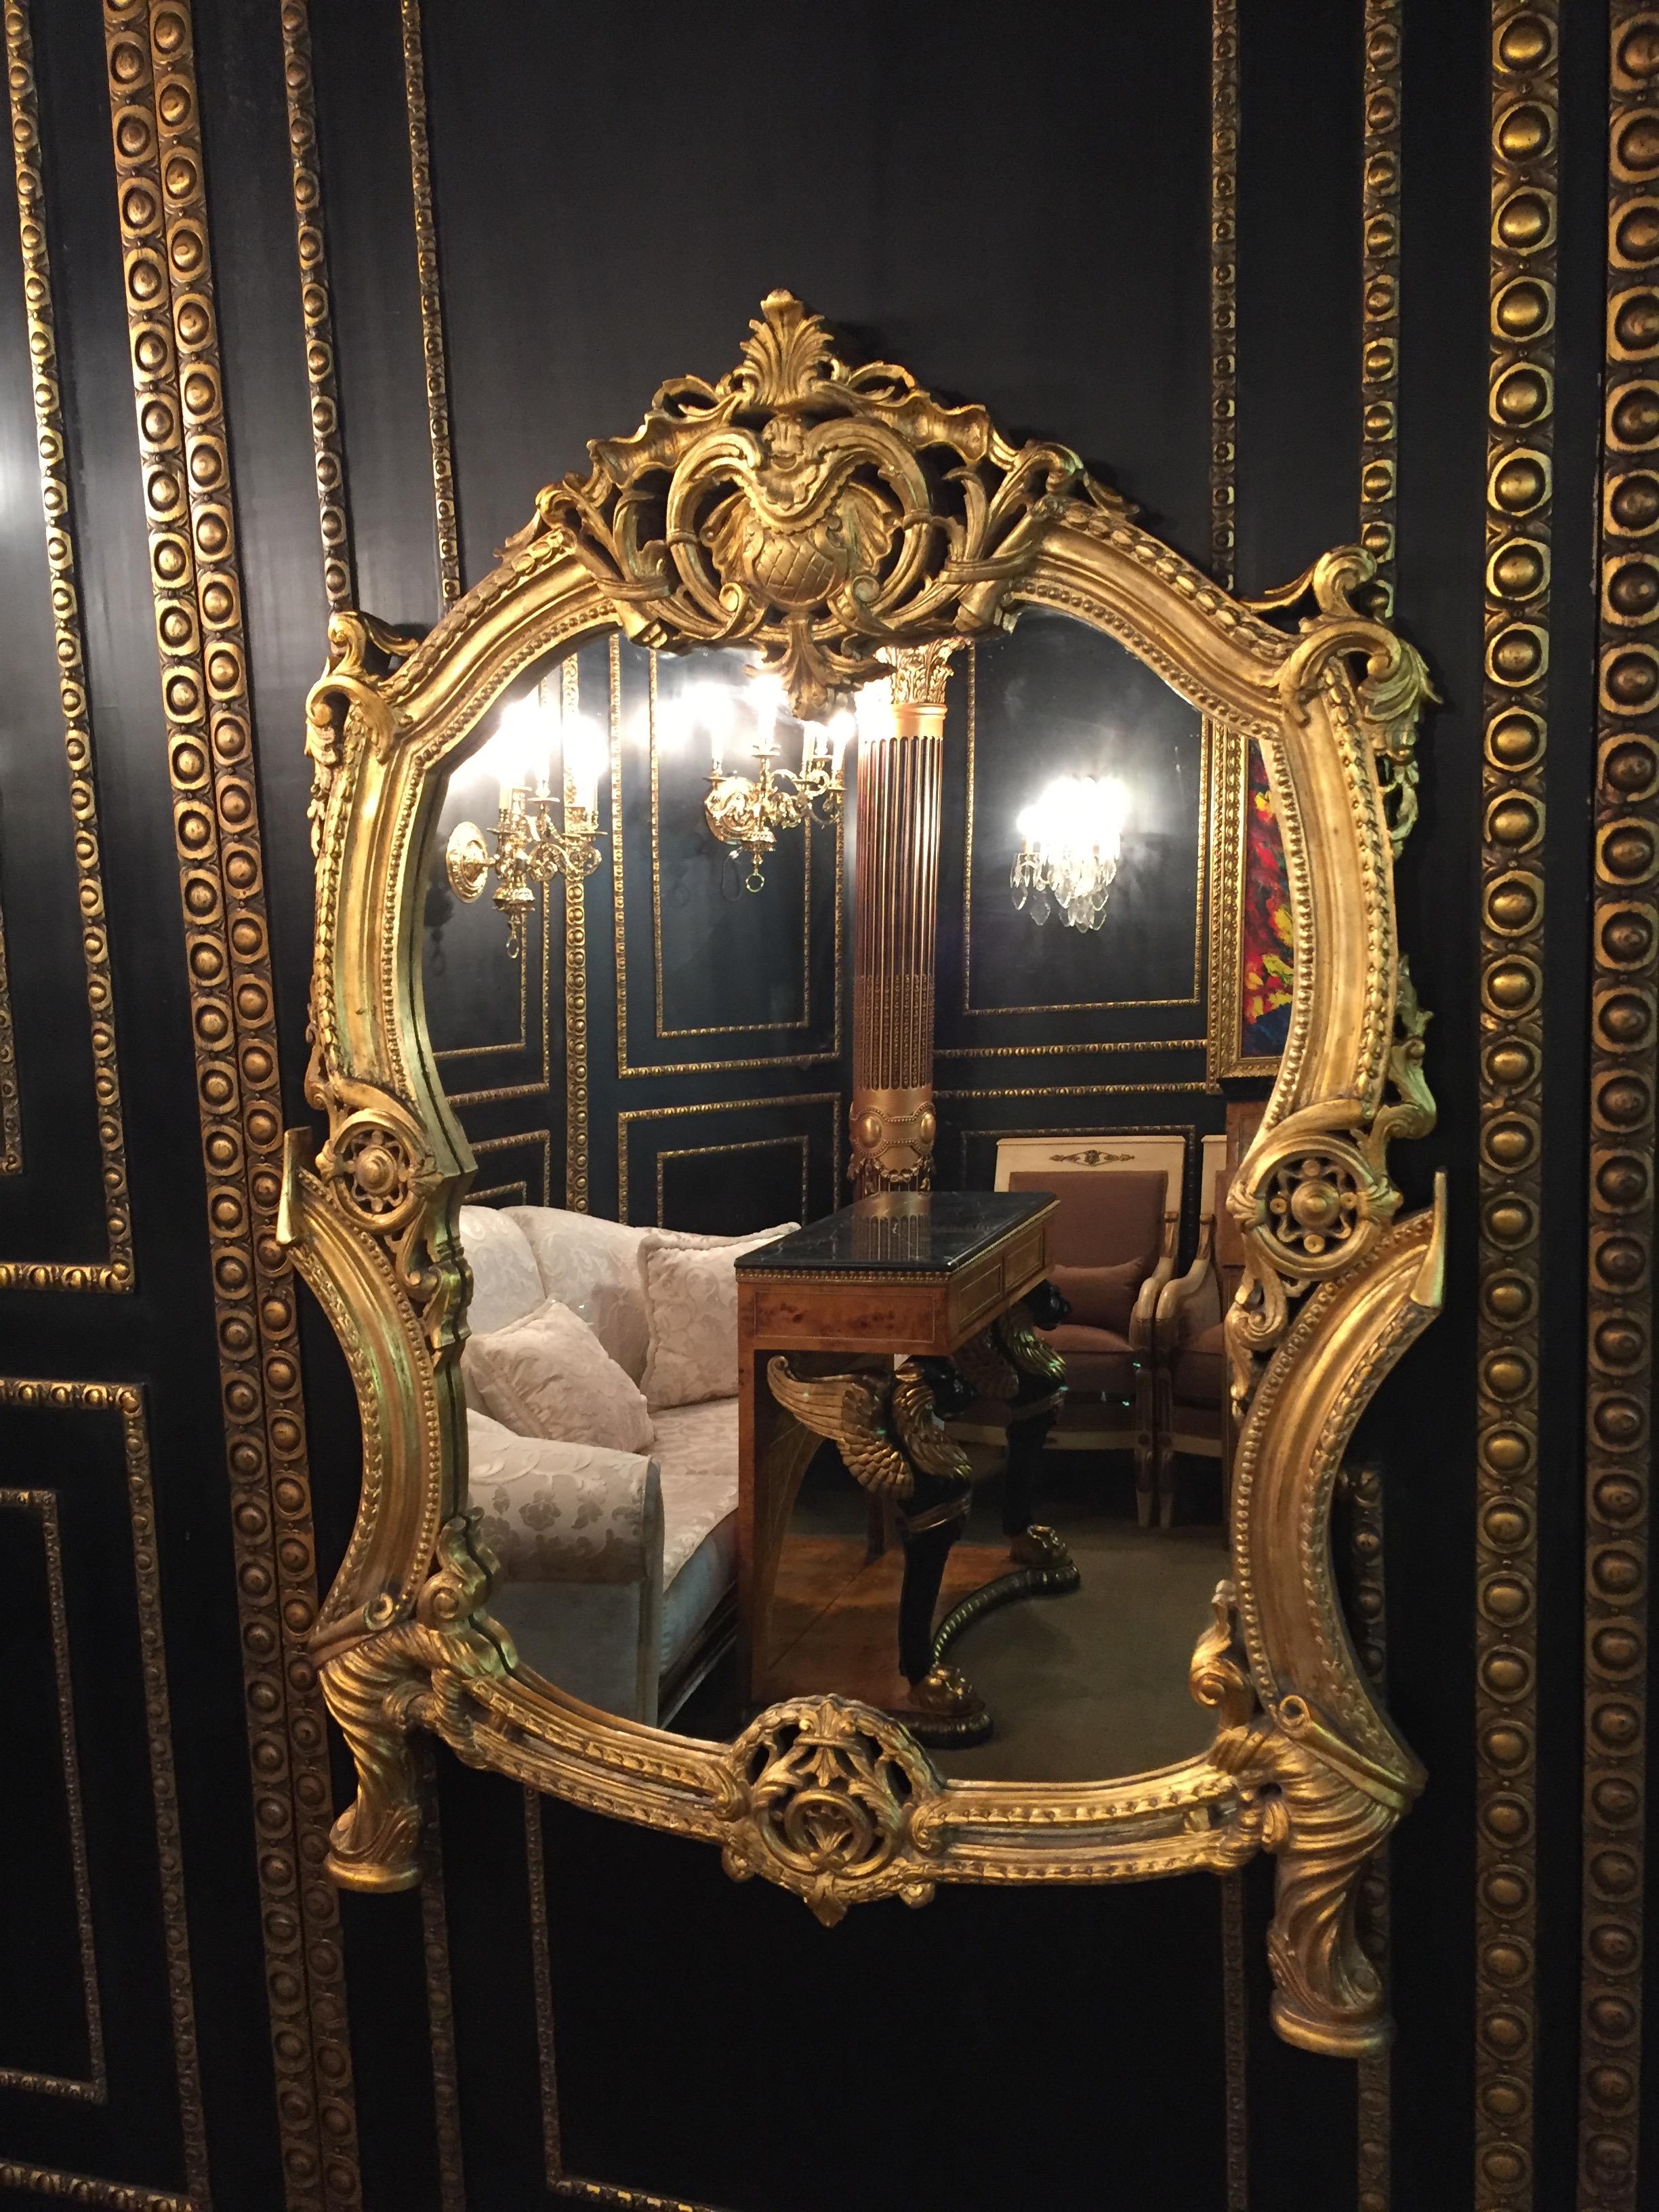 Splendid Rococo wall-mirror with Gold leaf. Solid beechwood, finely carved, hand painted and gilded.